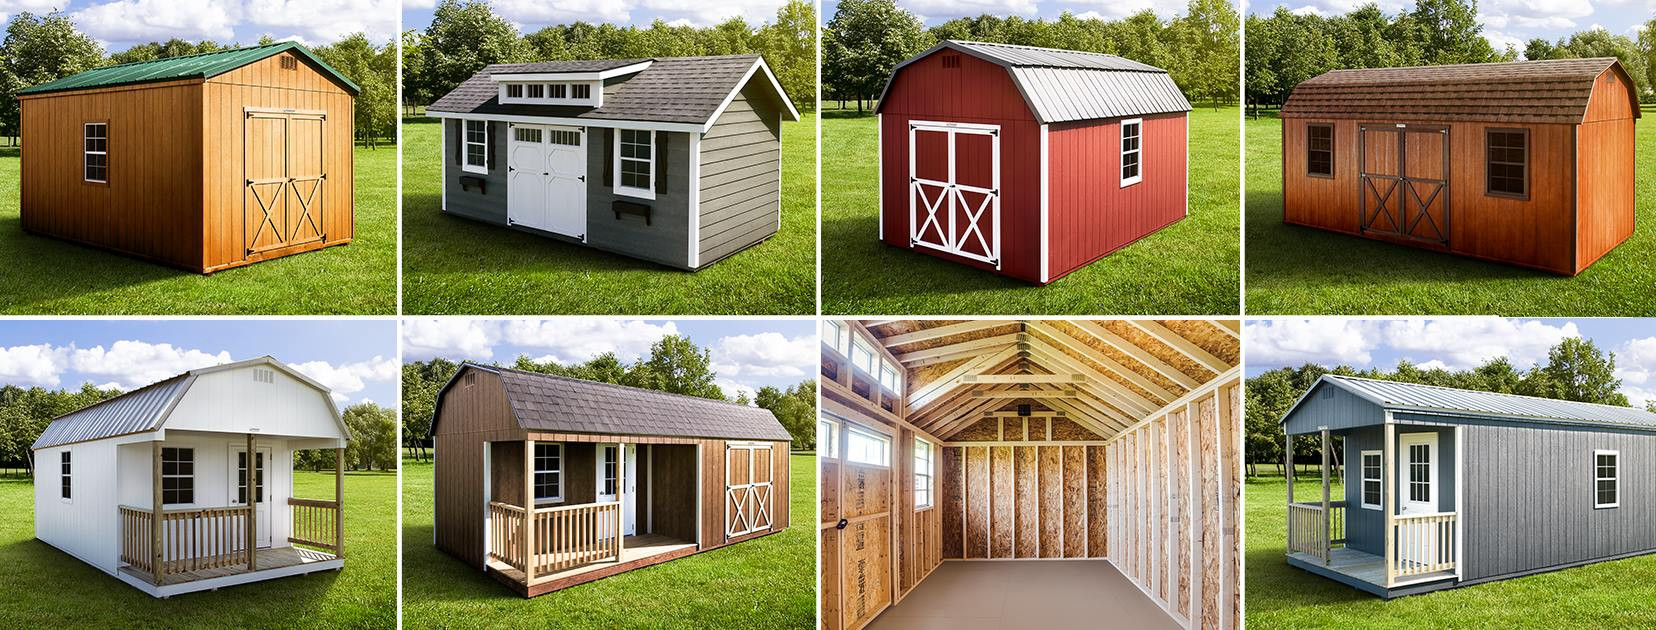 Texas Backyard Structures
 Wooden Sheds Austin Outdoor Sheds TX